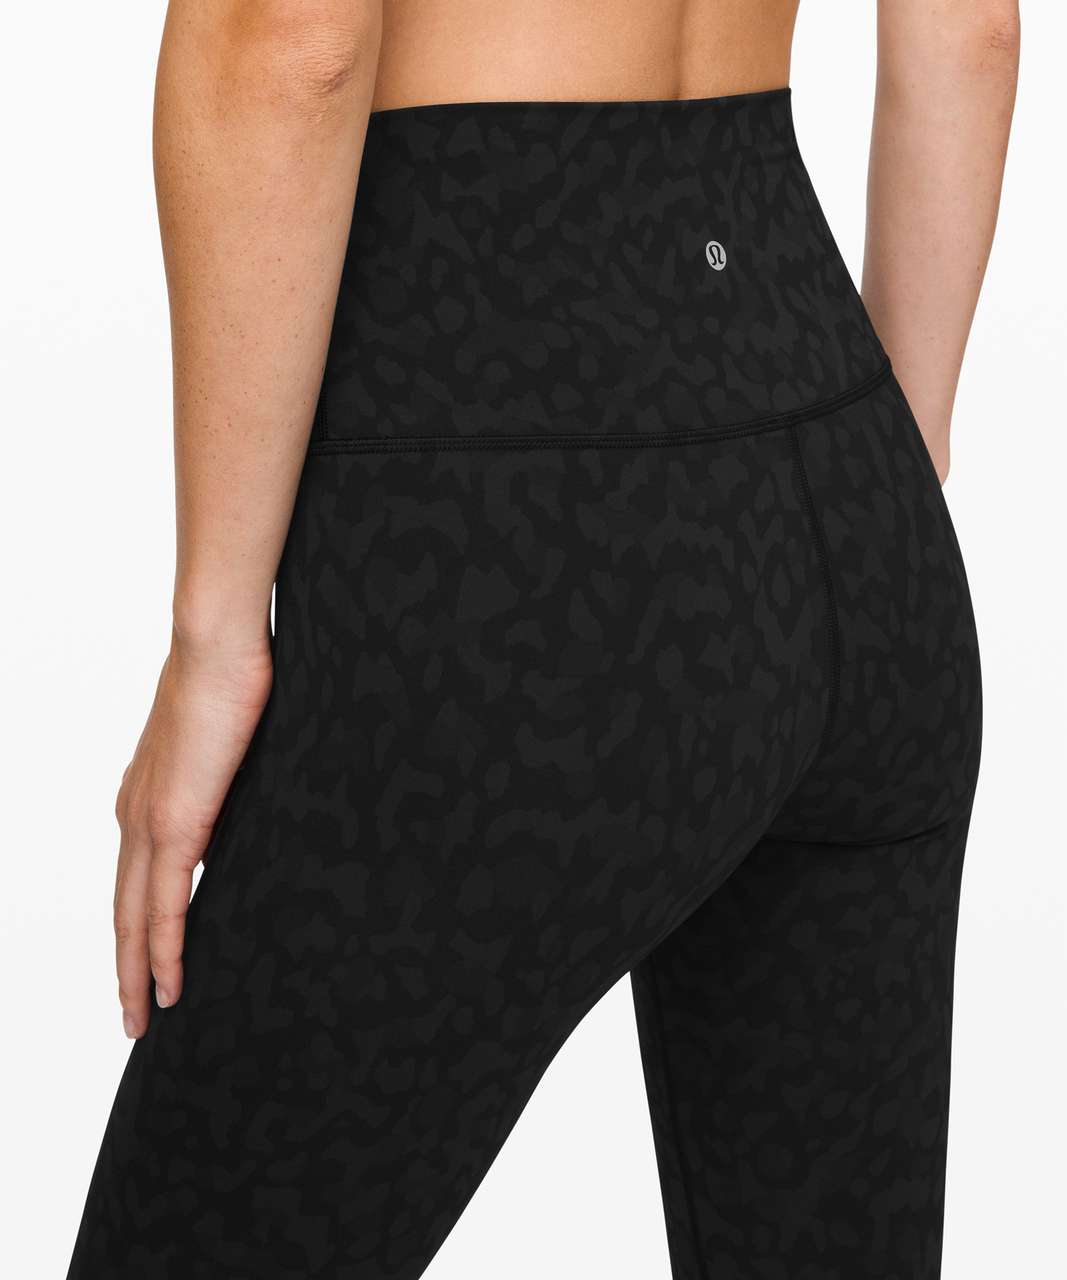 Lululemon Wunder Under Super High-Rise Tight *Full-On Luxtreme 28" - Formation Camo Deep Coal Multi